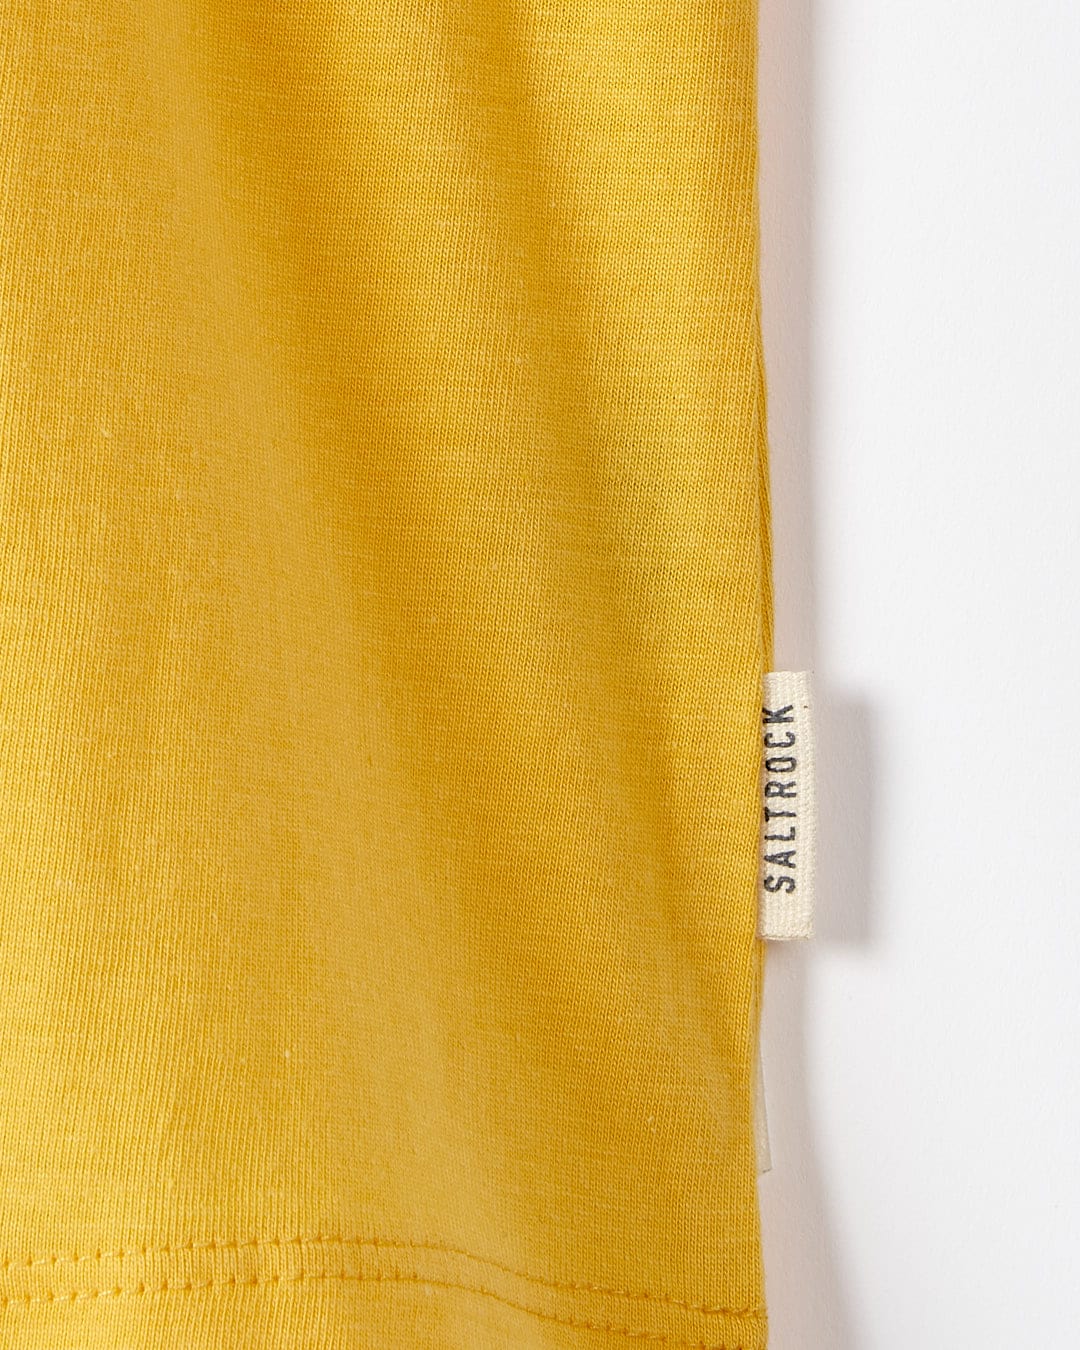 A close up of a Saltrock On The Road Devon - Womens Short Sleeve T-Shirt - Yellow.